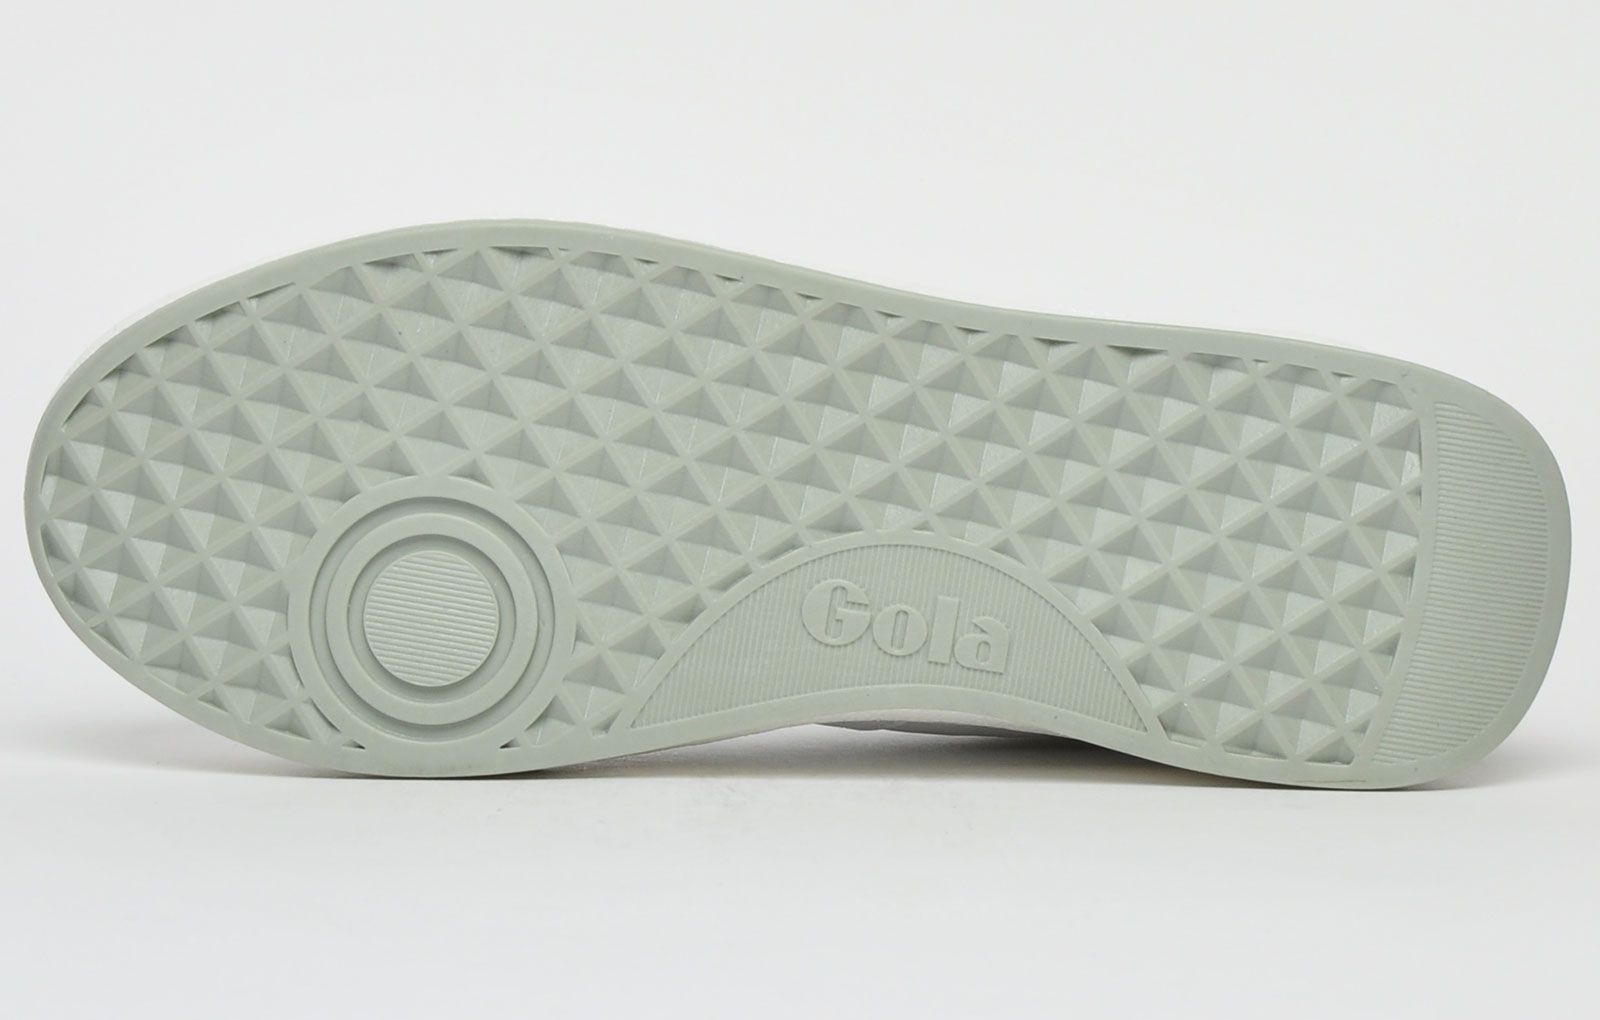 This Gola Classics Grandslam is an on-trend silhouette paying homage to Gola’s British roots taking the classic court design and adding mesh panels with a contrasting vintage styled outsole giving a fresh and modern look that you’d expect from Gola. <p>Iconic Gola signature details finish these Grandslam trainers in style.</p> <p>- Textile/ leather upper</p> <p>- On-trend retro styling</p> <p>- Secure lace up system</p> <p>- Vintage styled outsole</p> <p>- Gola Classics branding throughout</p>